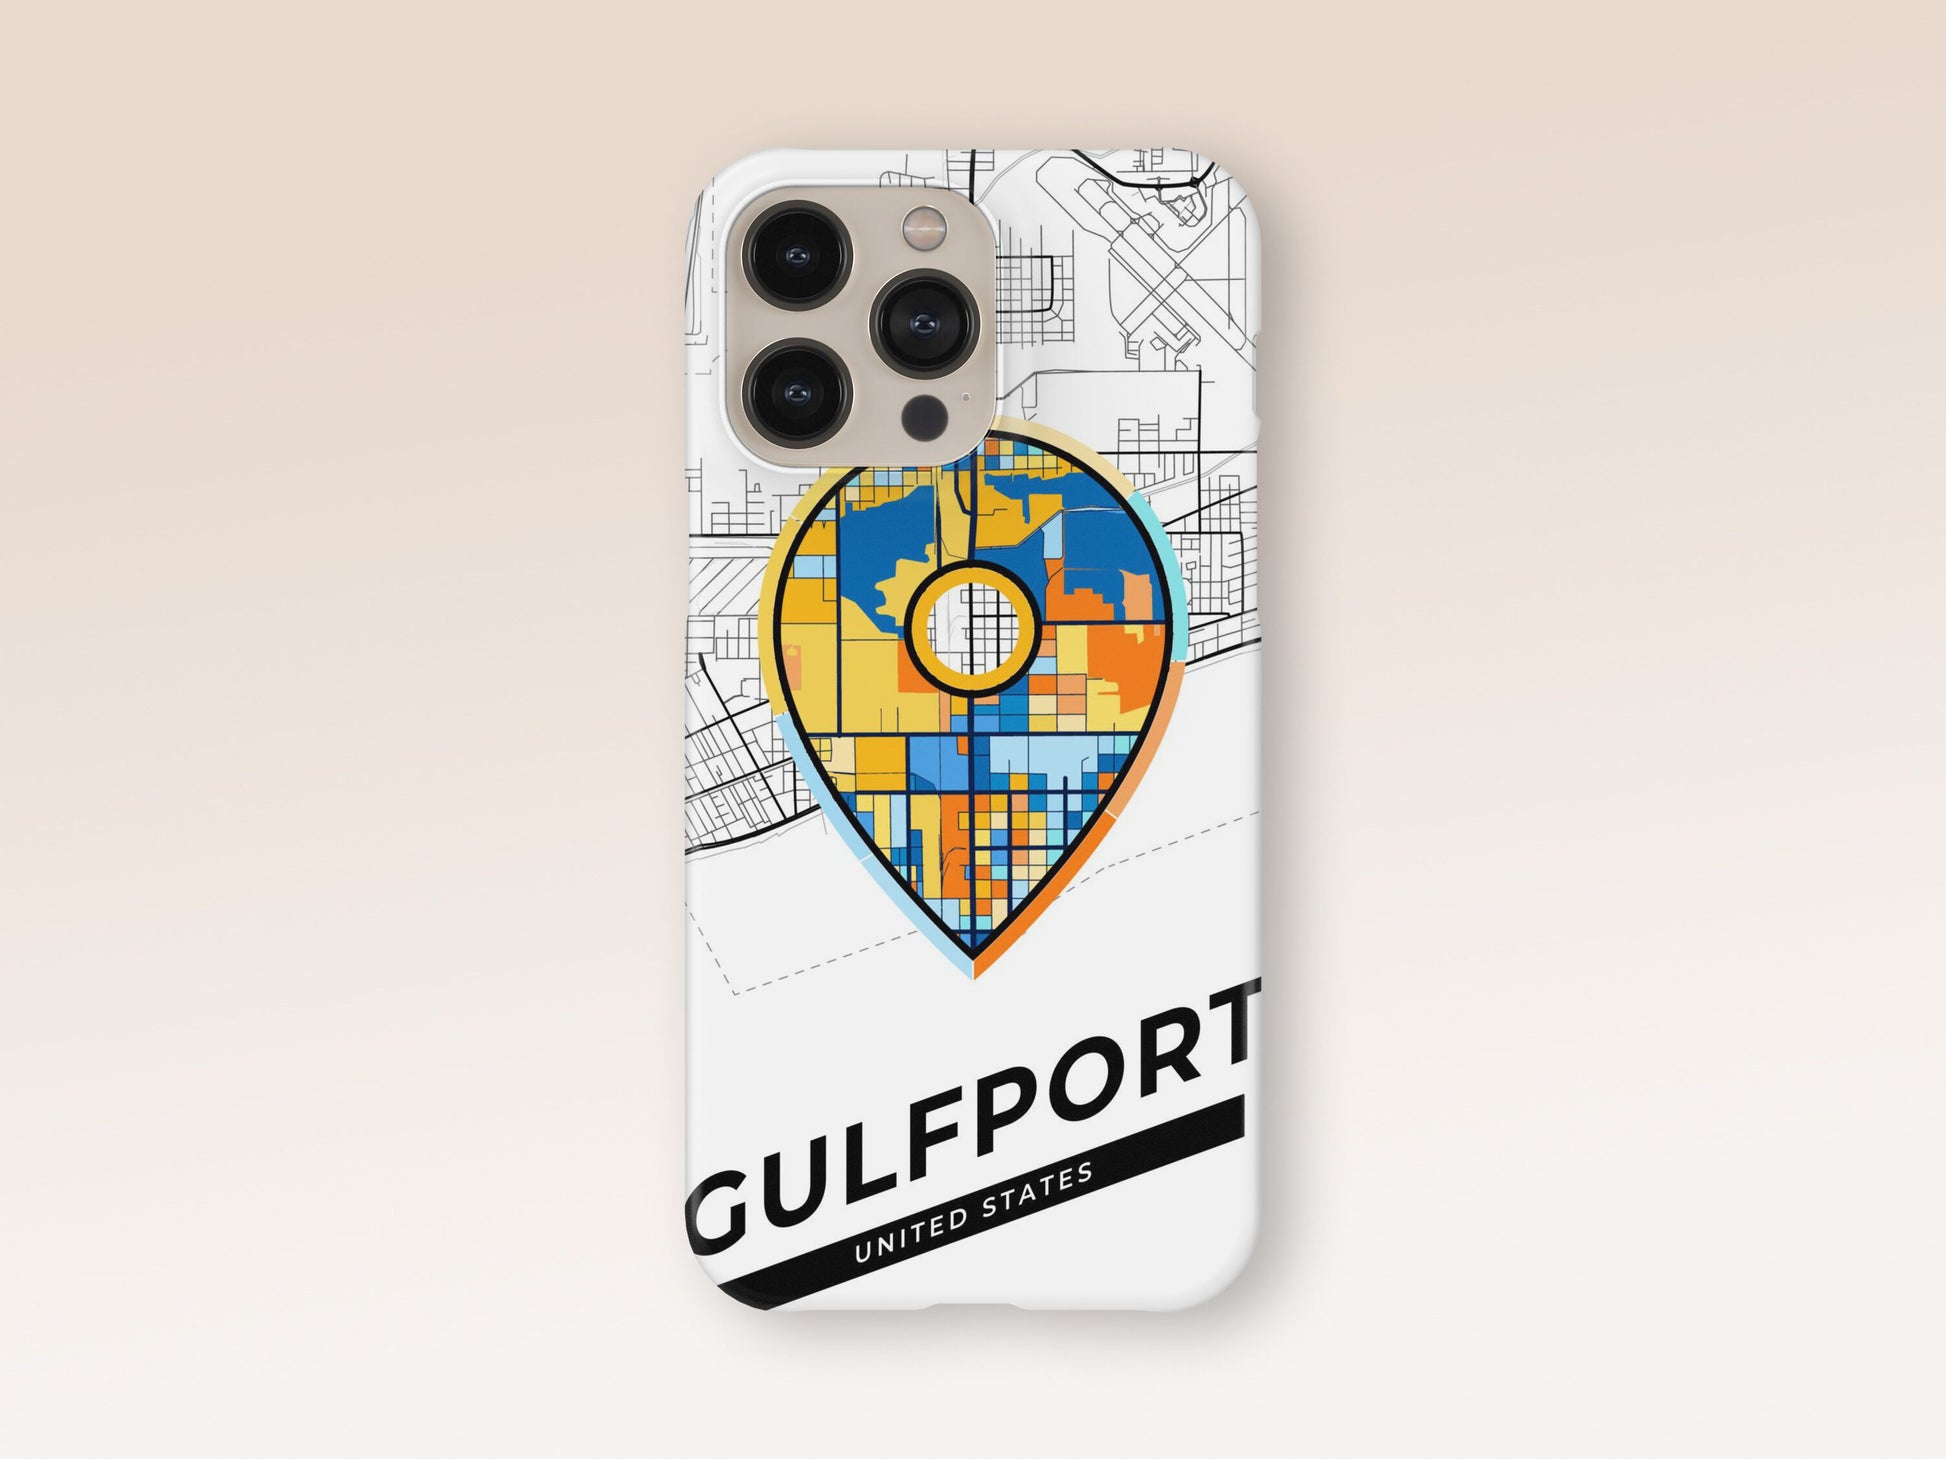 Gulfport Mississippi slim phone case with colorful icon. Birthday, wedding or housewarming gift. Couple match cases. 1